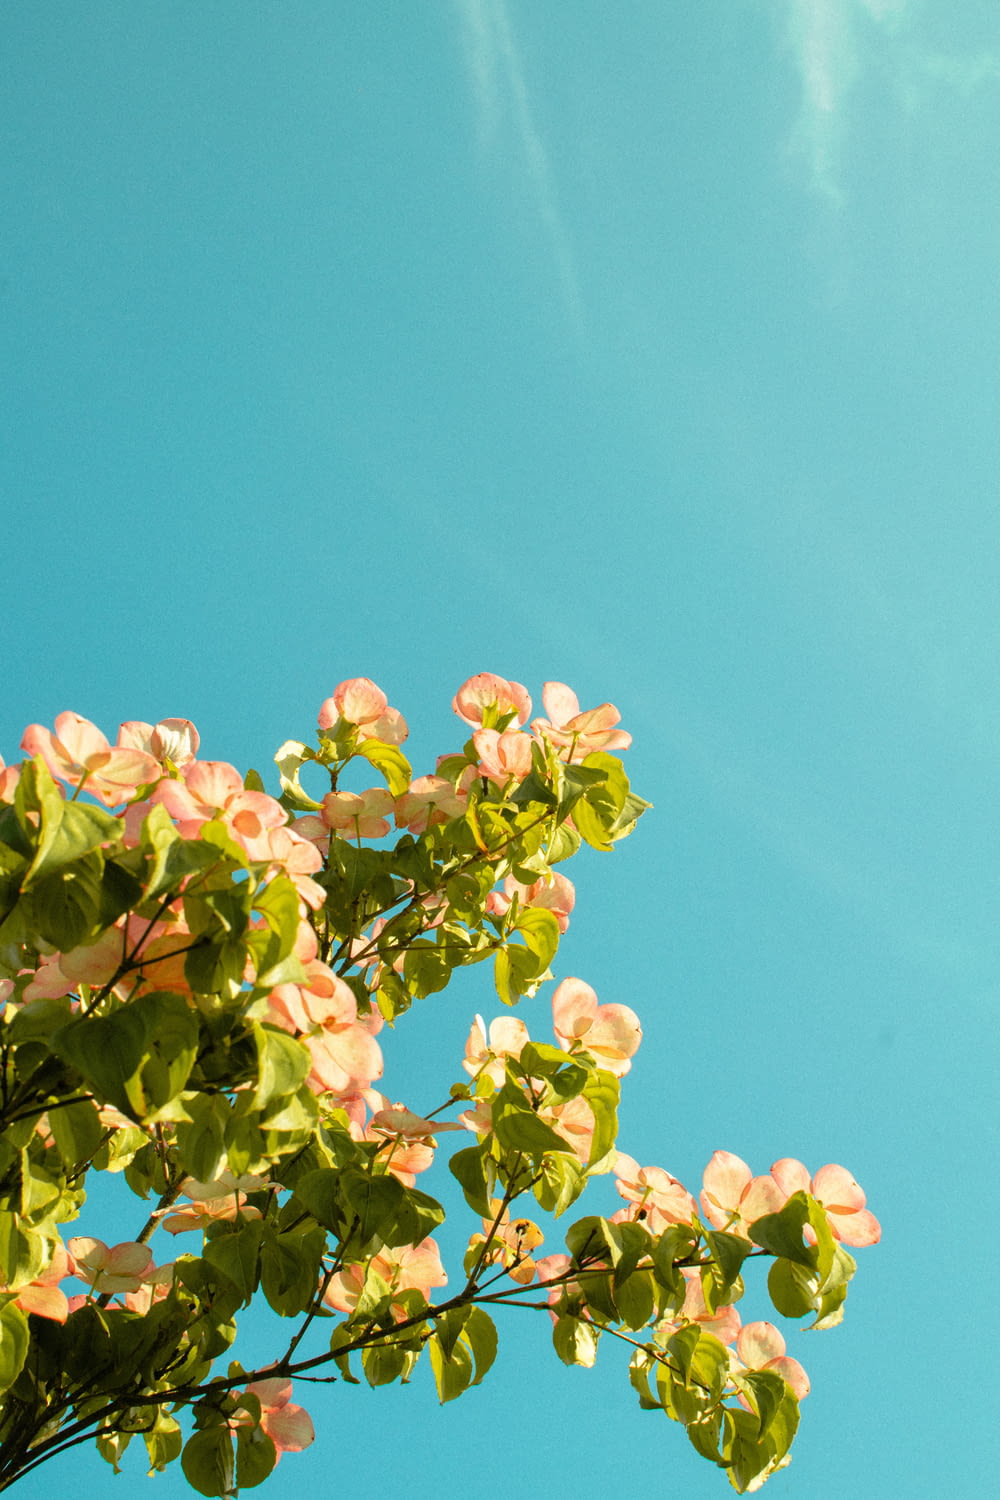 a tree branch with pink flowers against a blue sky